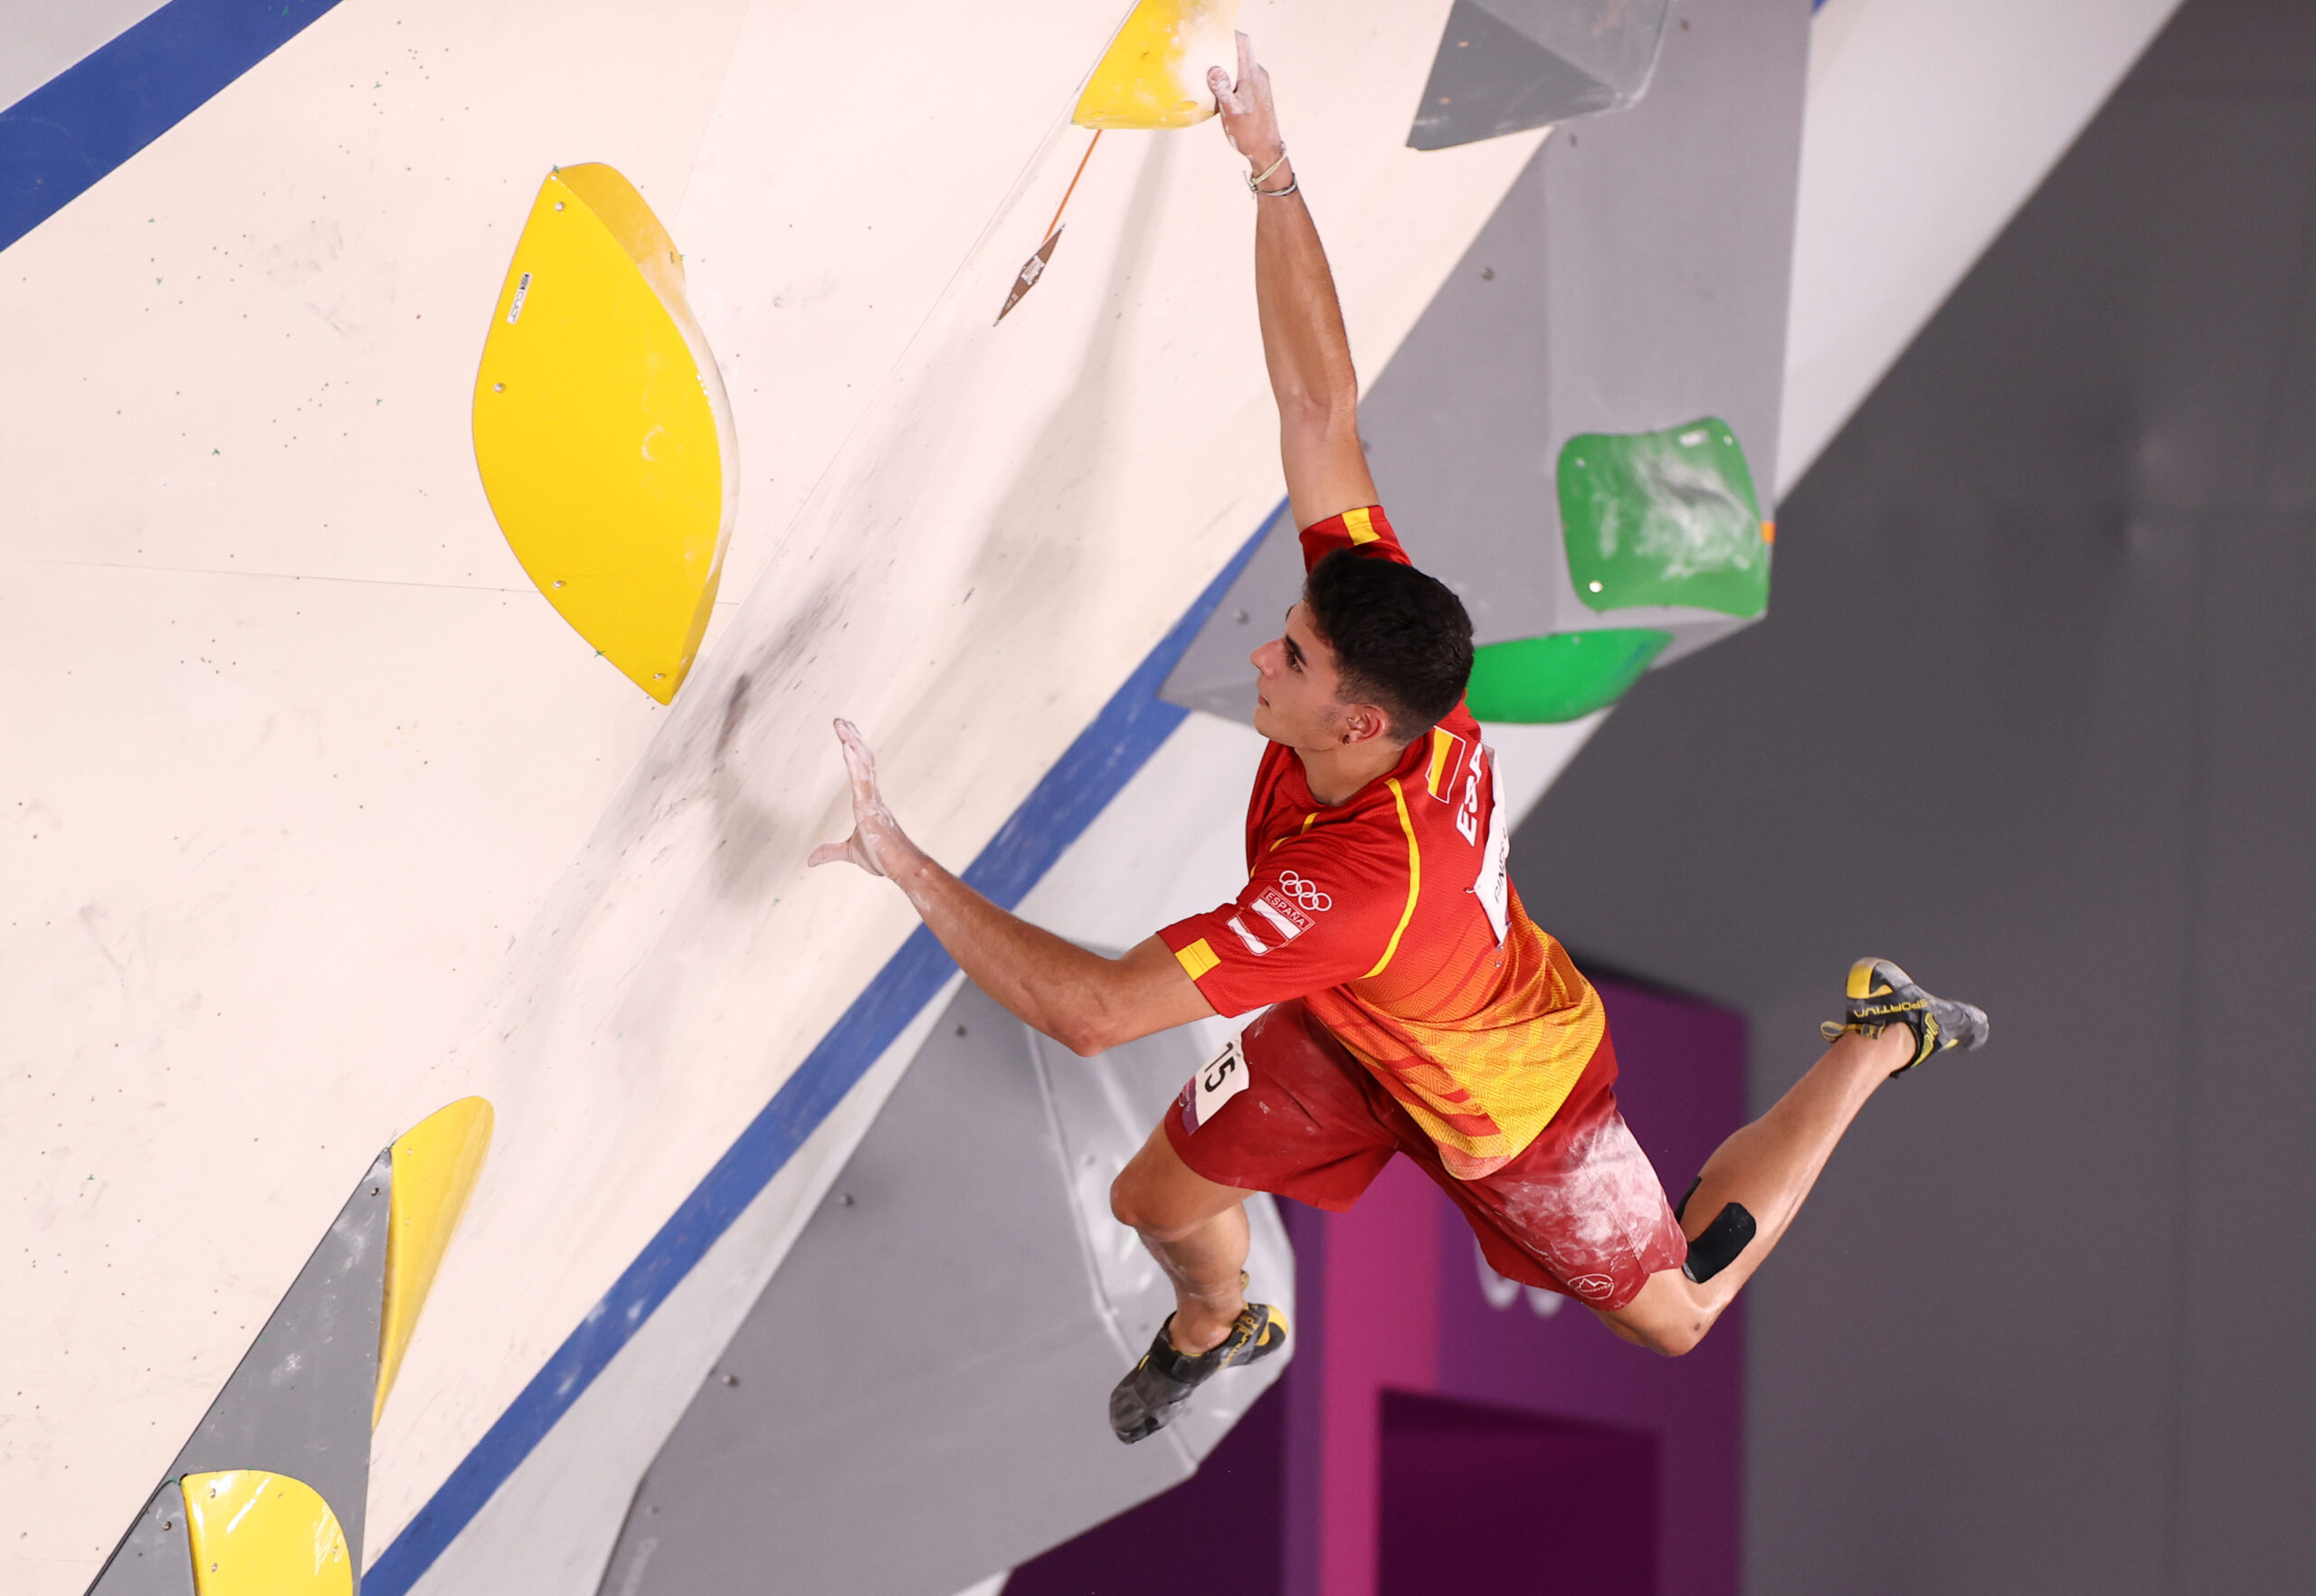 13-facts-about-sport-climbing